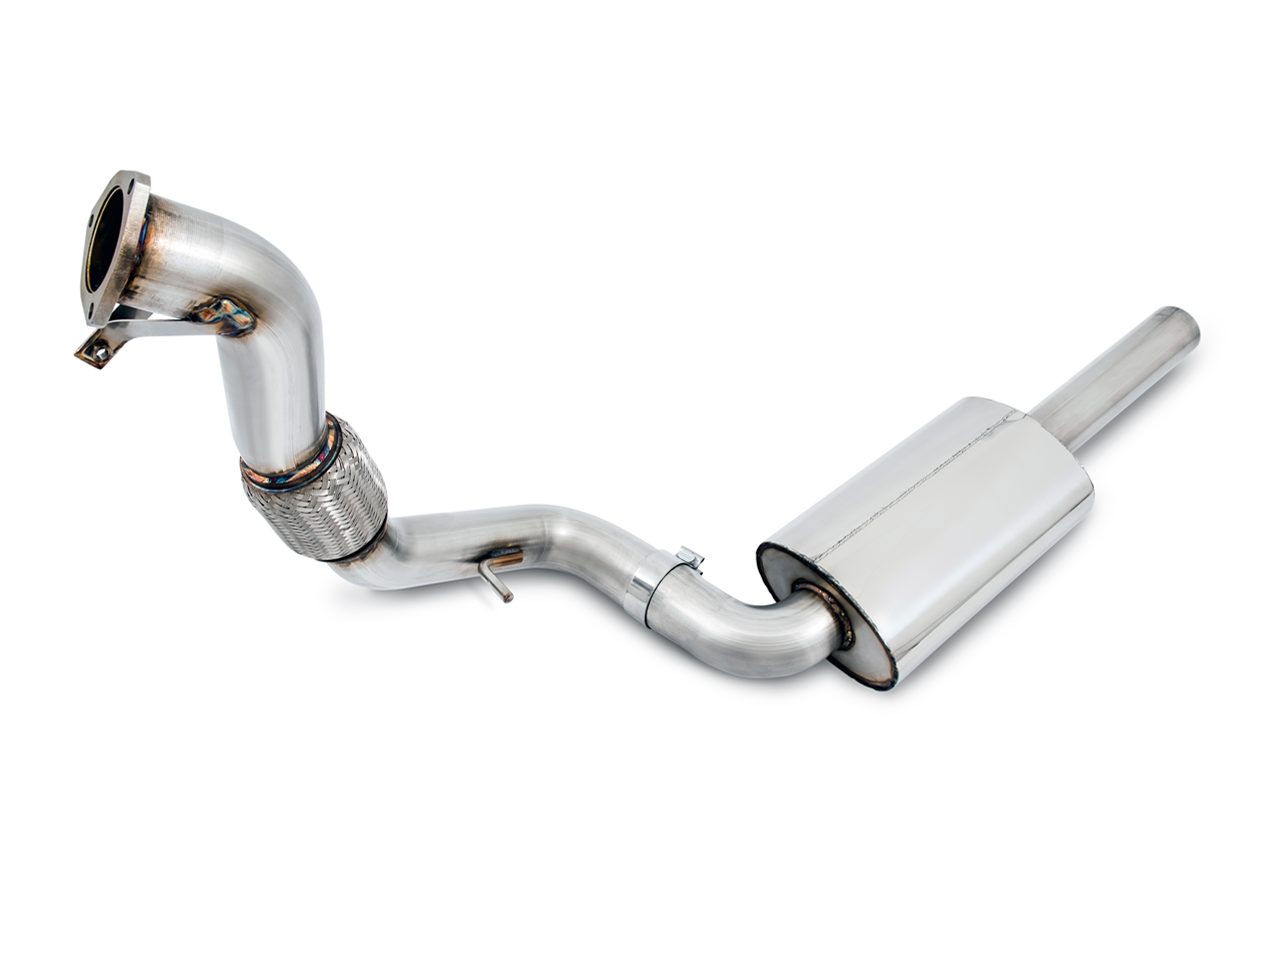 AWE Tuning Cat-Back Exhaust Track Edition for 2003-05 Audi S4 [B6]